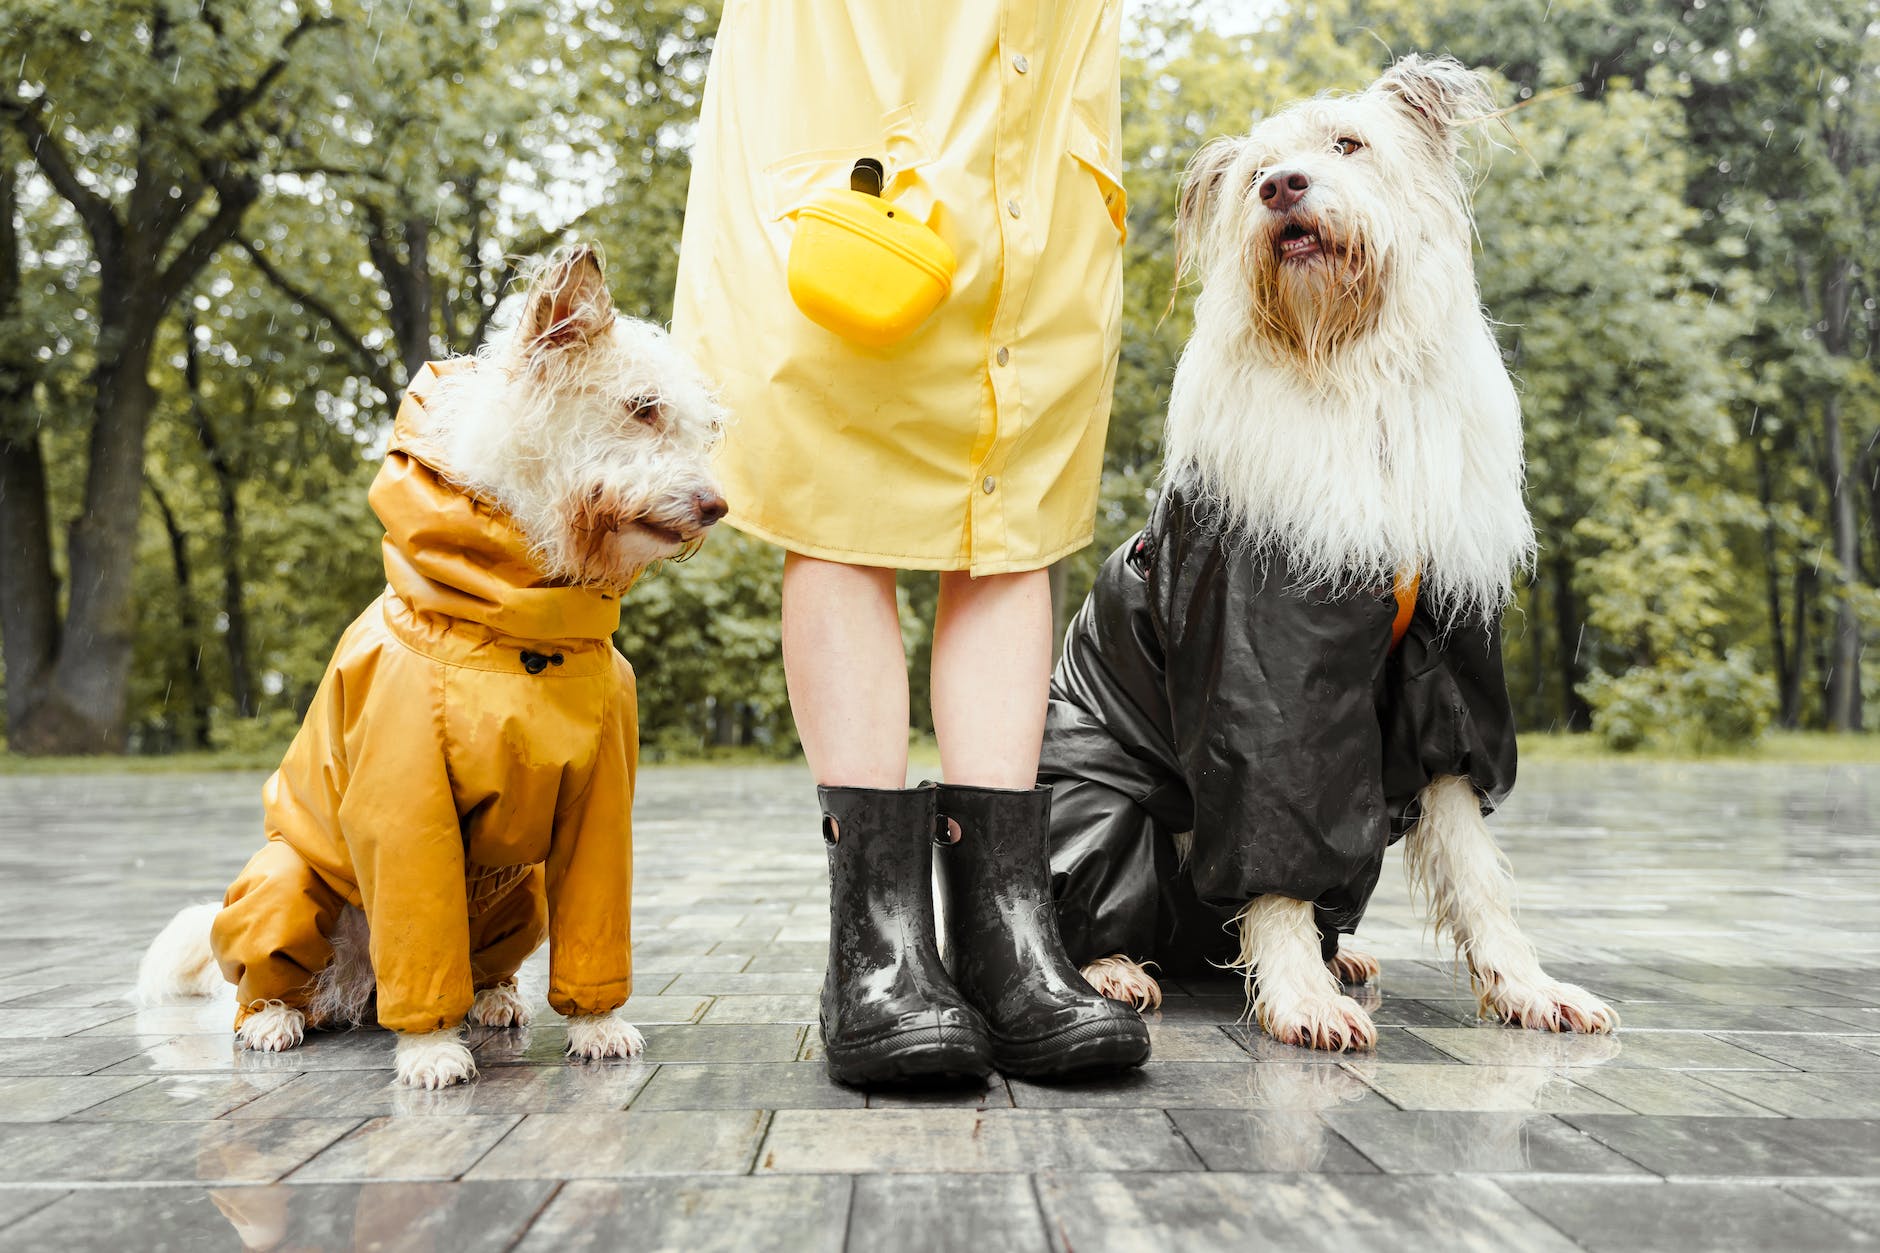 Safeguard your dog walking venture with a comprehensive agreement. Ensure a secure and joyful experience for all.